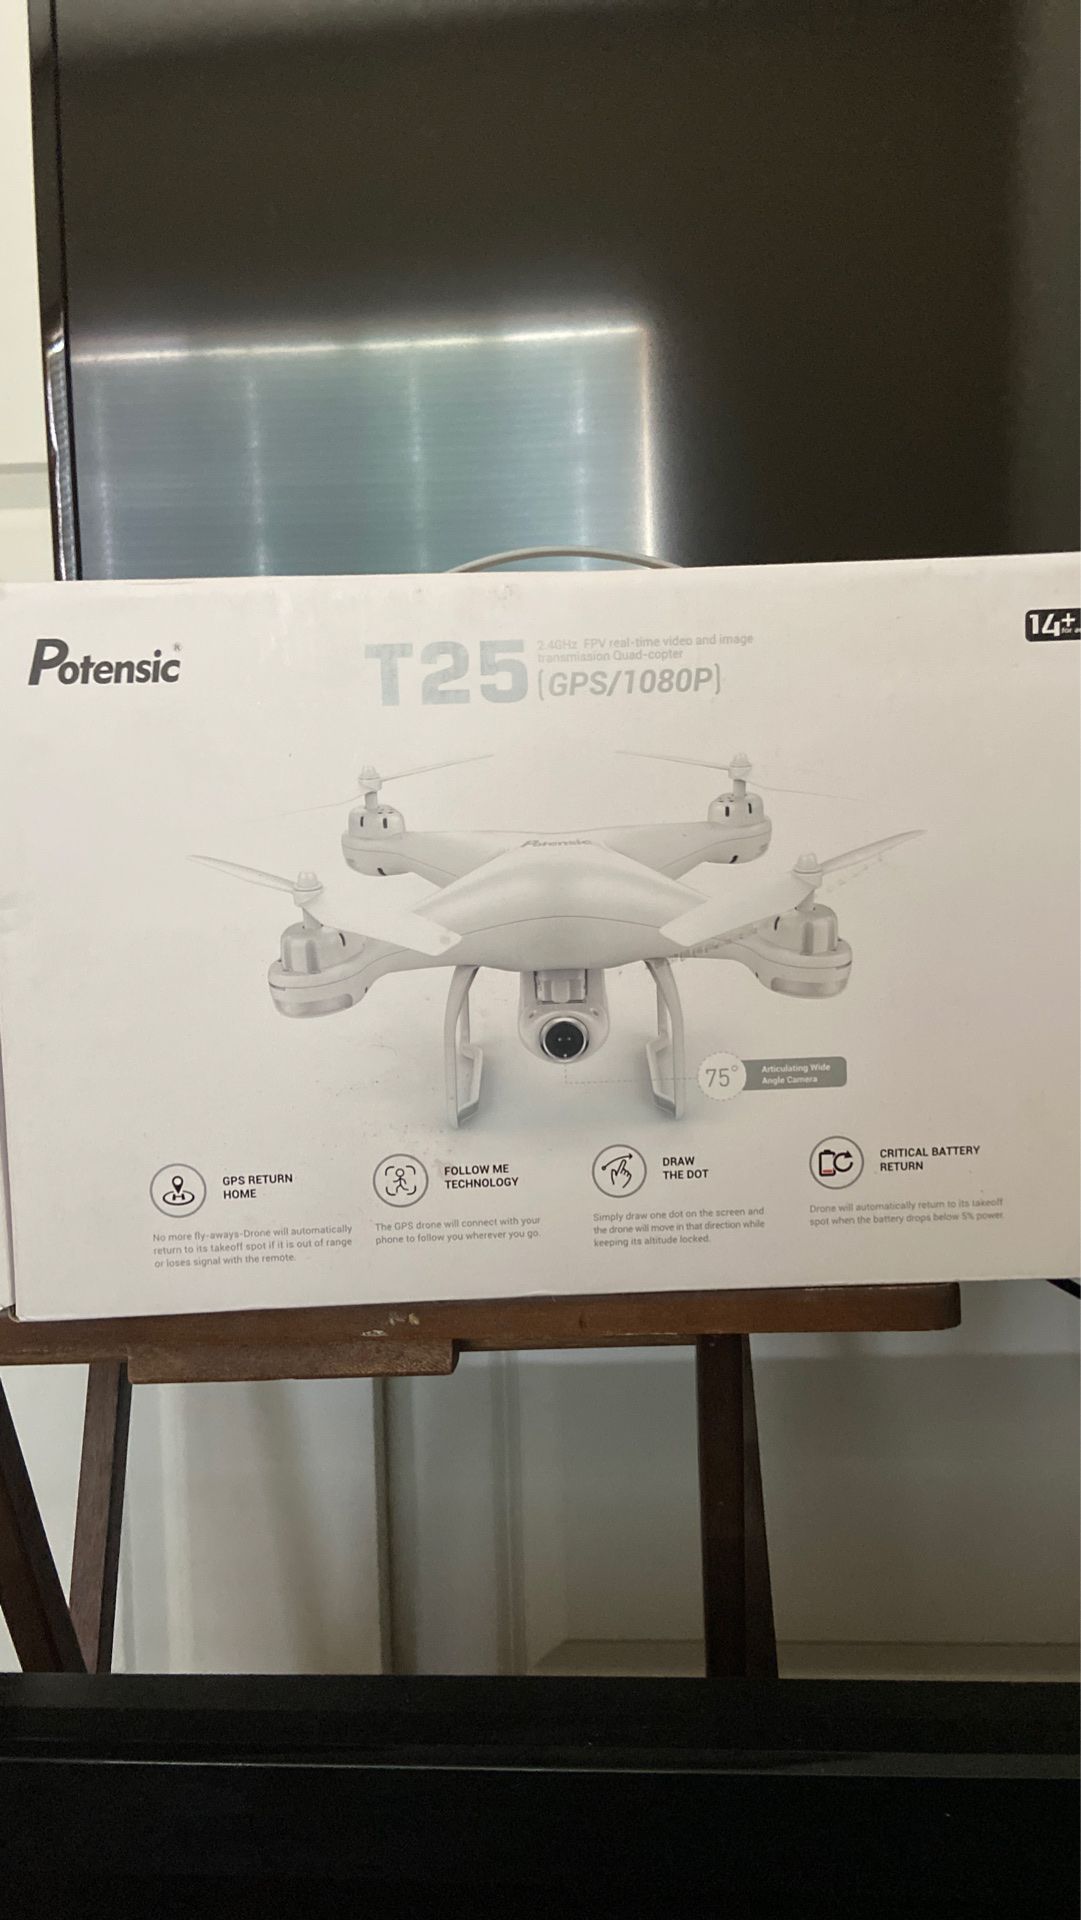 Potensic T25 drone with camera and gps